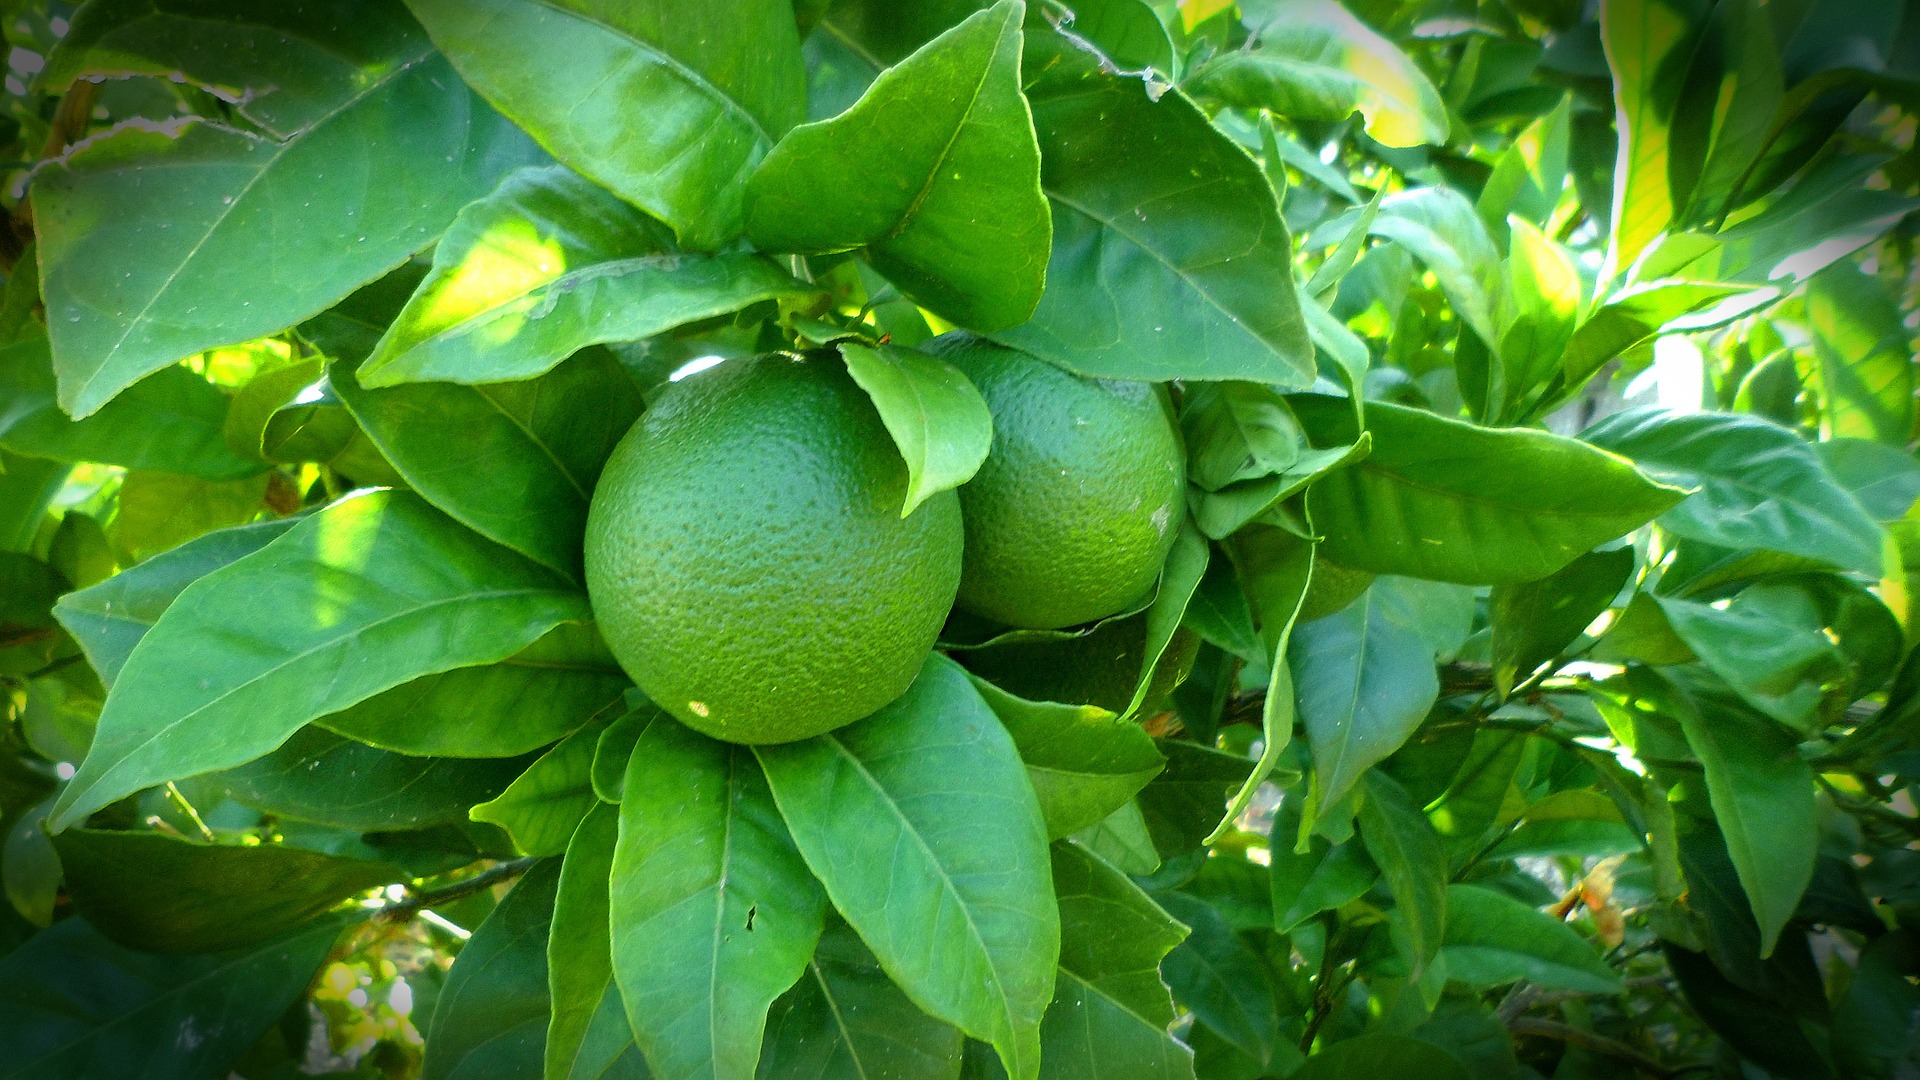 big green limes growing on tree, surrounded by green leaves